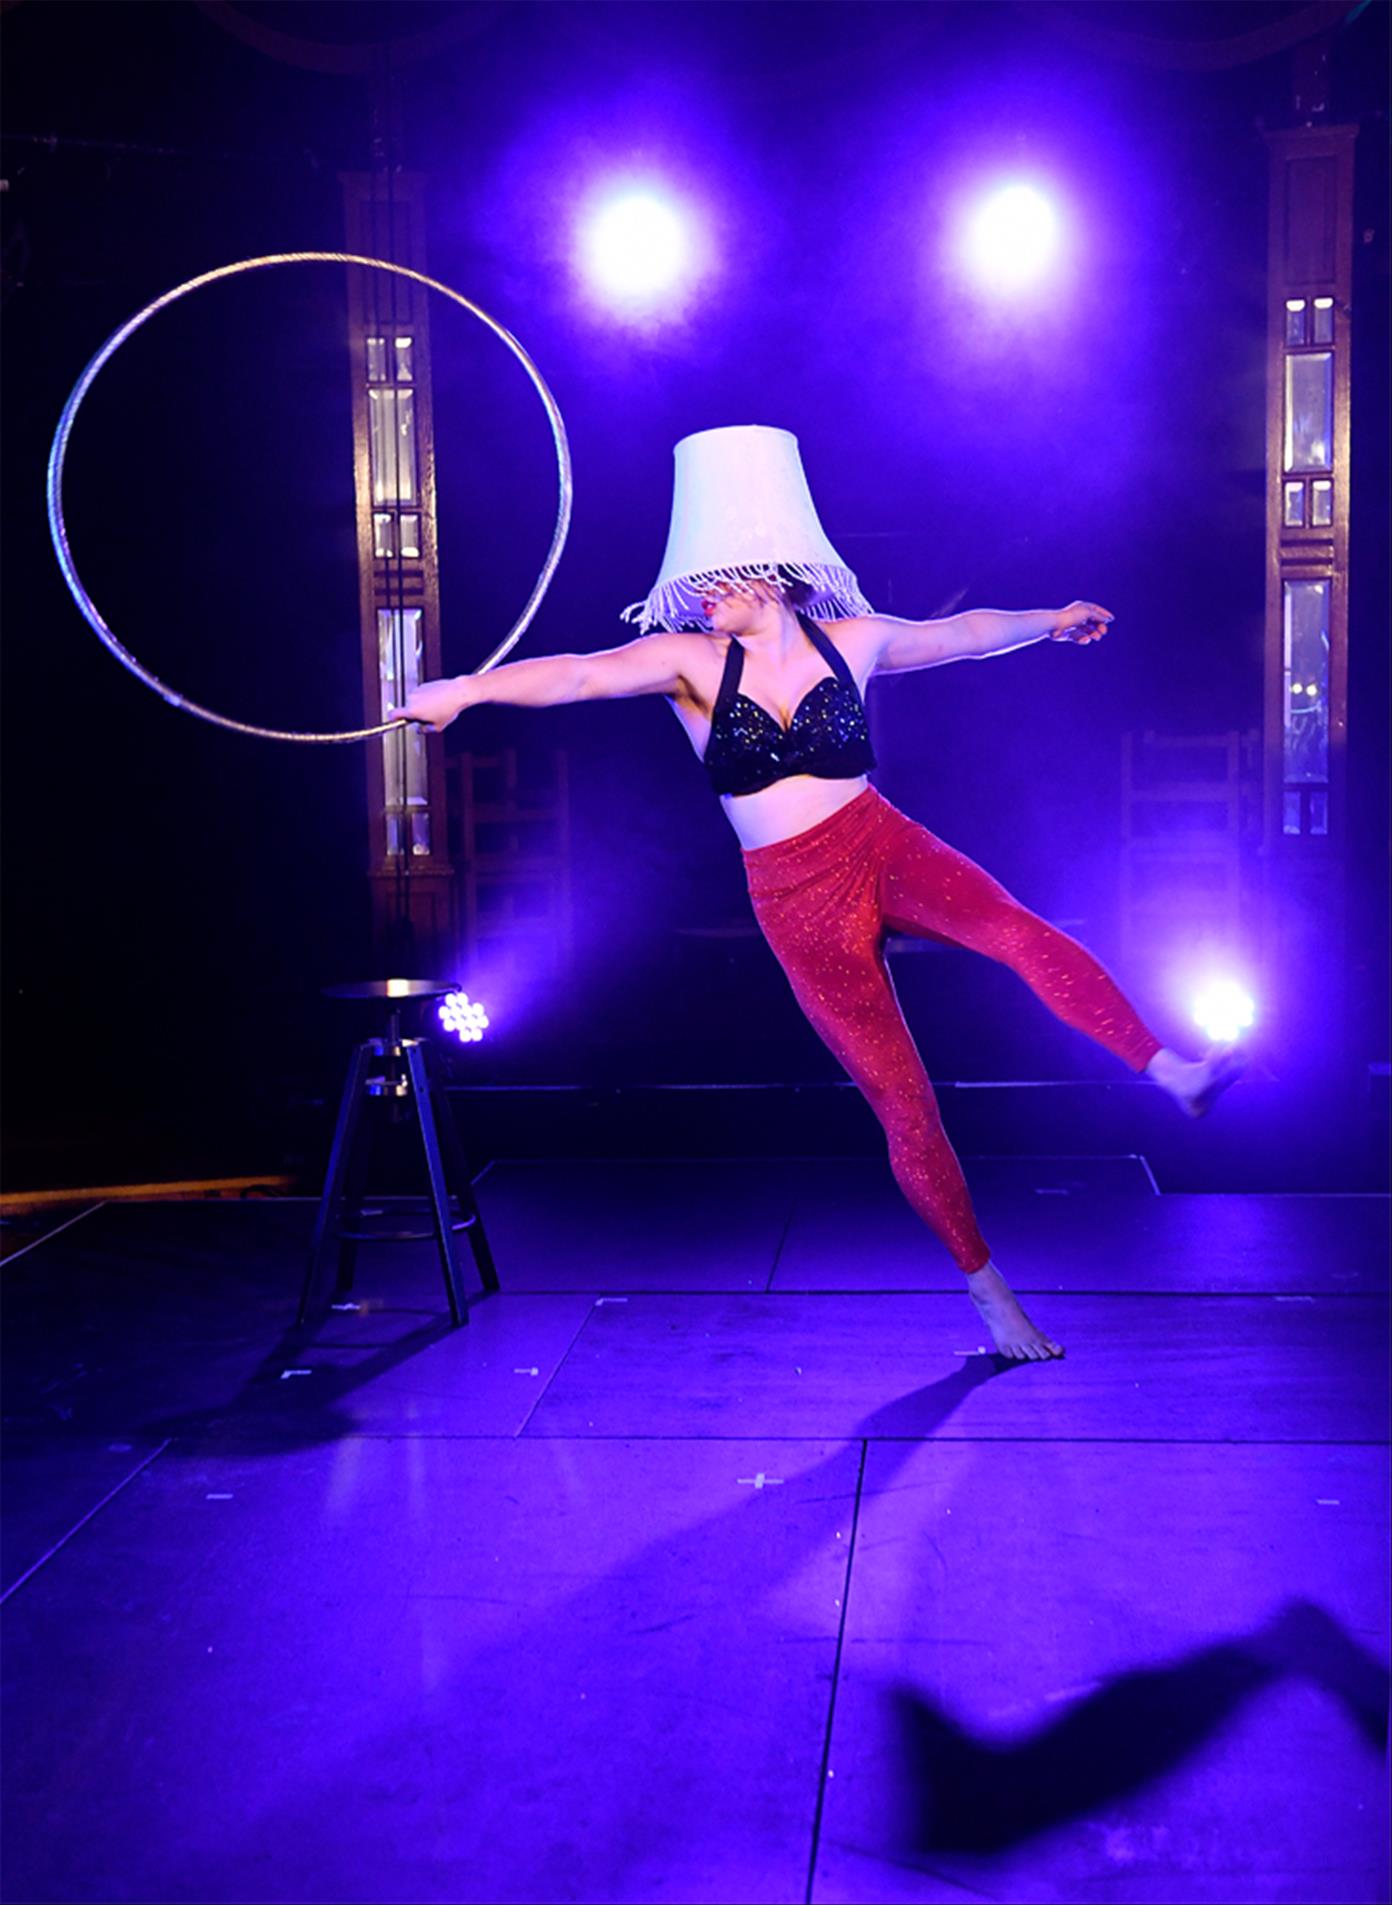 Woman gracefully dances with a hoola hoop, balancing a lamp shade on her head.